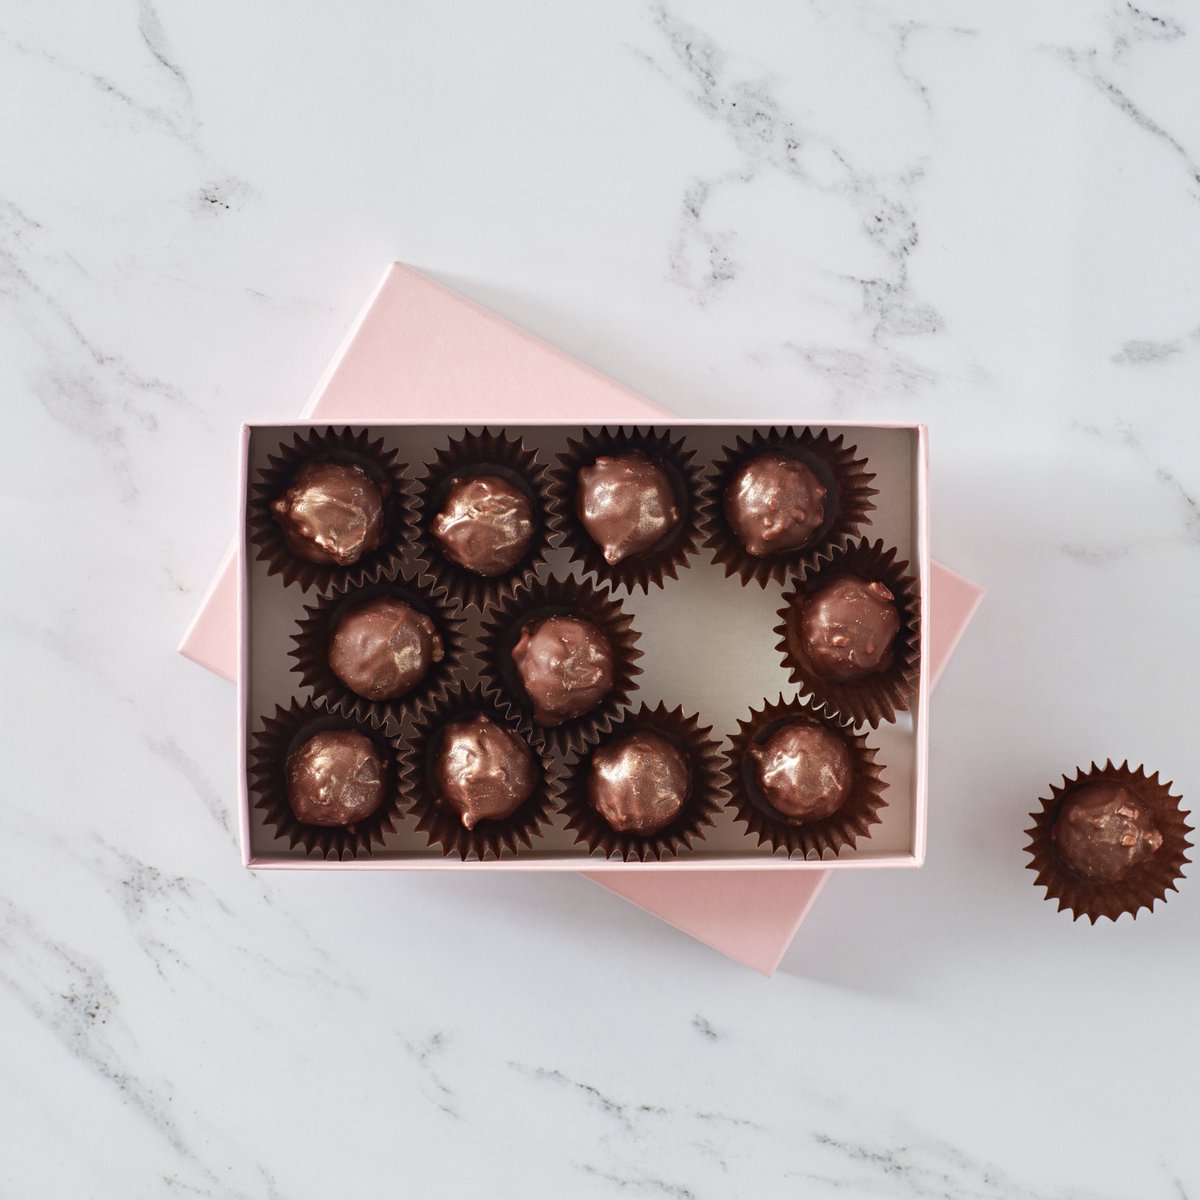 Praline Cake Truffles by Born Original Ambassador Sophie Bamford! Made with left over cake to reduce wastage in your kitchen. Discover them at youtu.be/vGTo9g-76RY #callebaut #recipe #BornOriginal